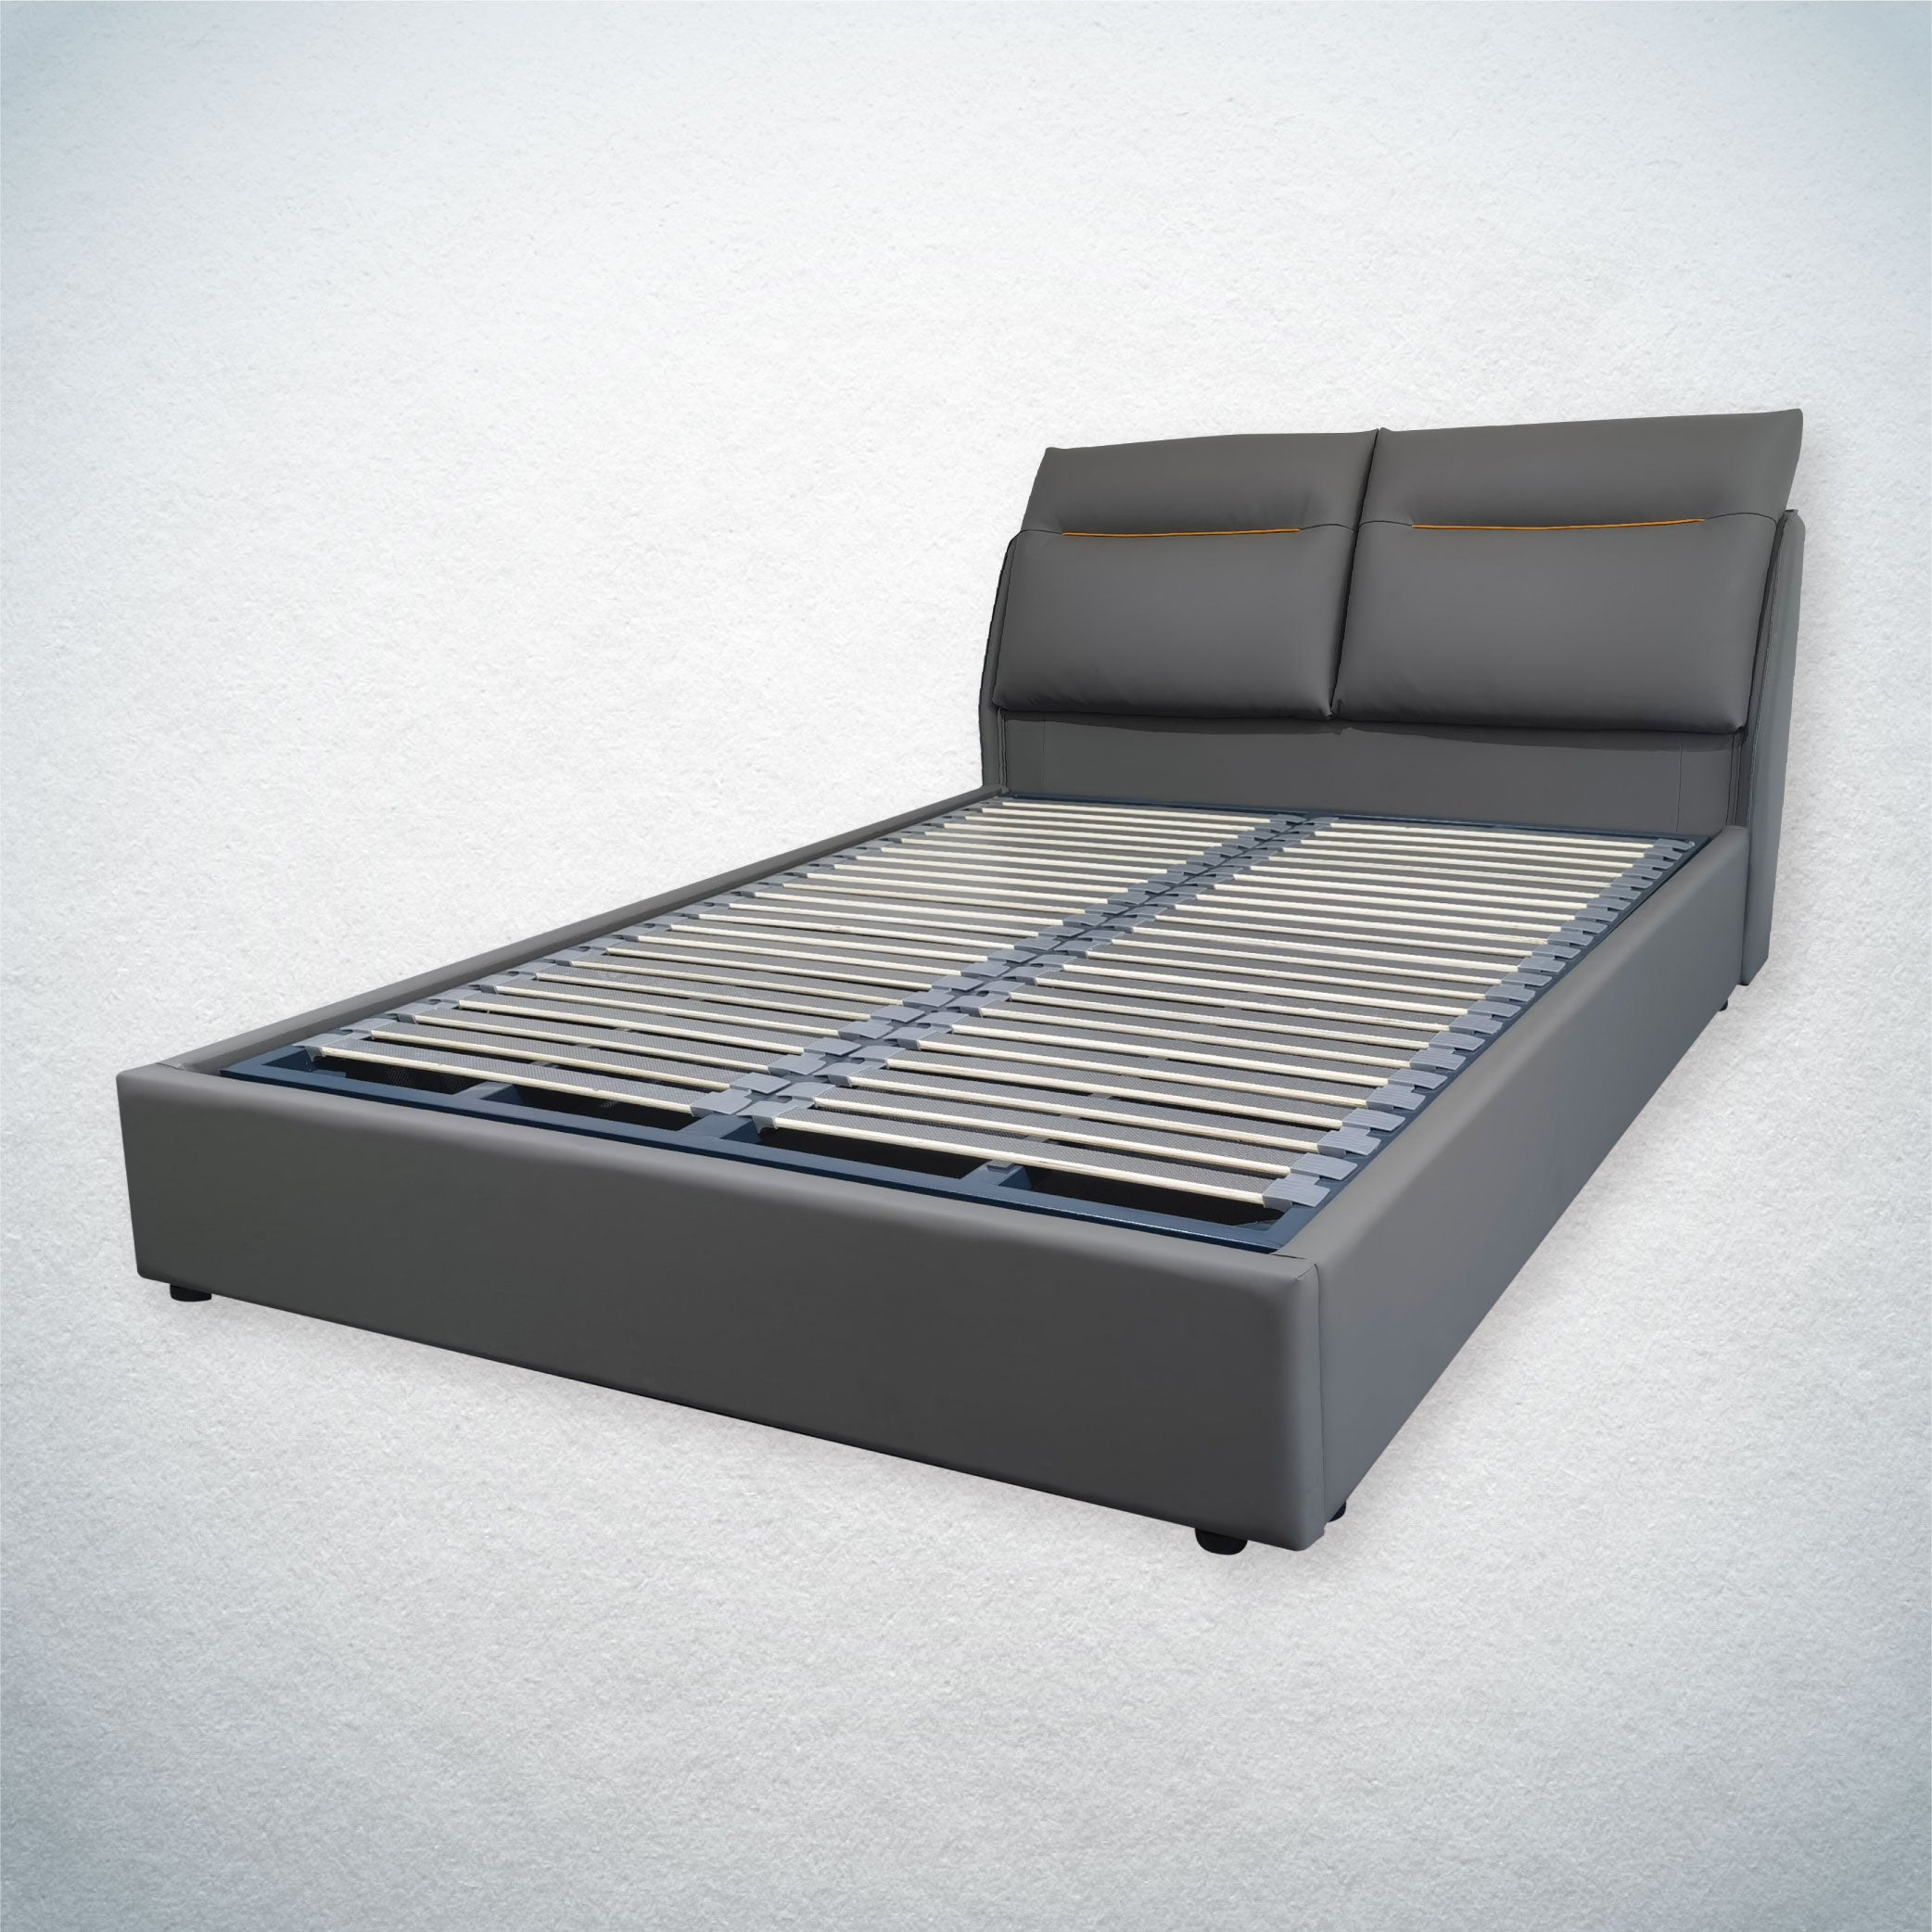 Premium & Extra-thick Hydraulic Bed Frame